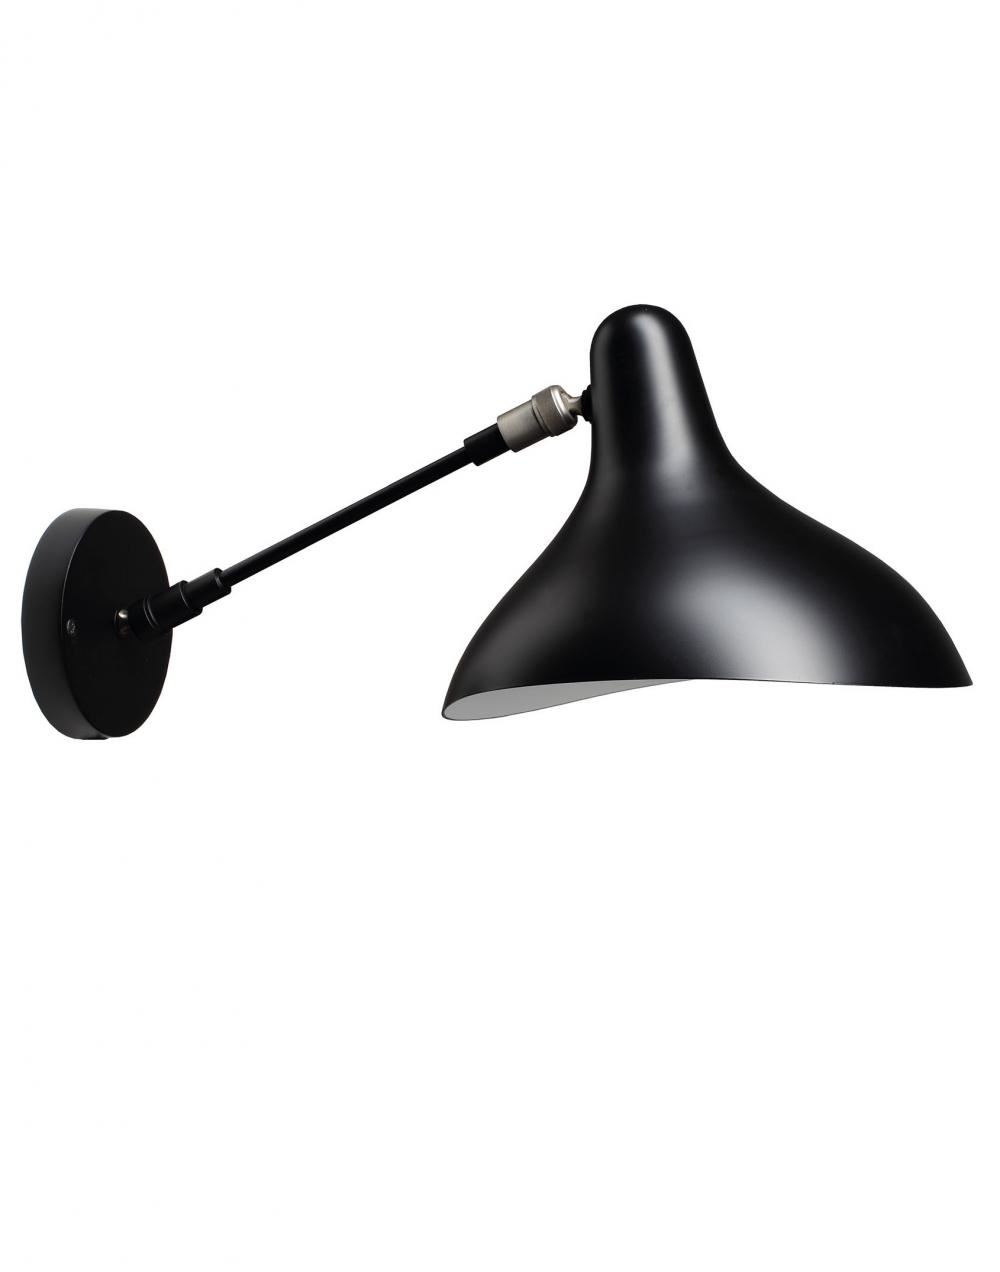 Mantis Bs5 Wall Light Black Satin Standard With Switch